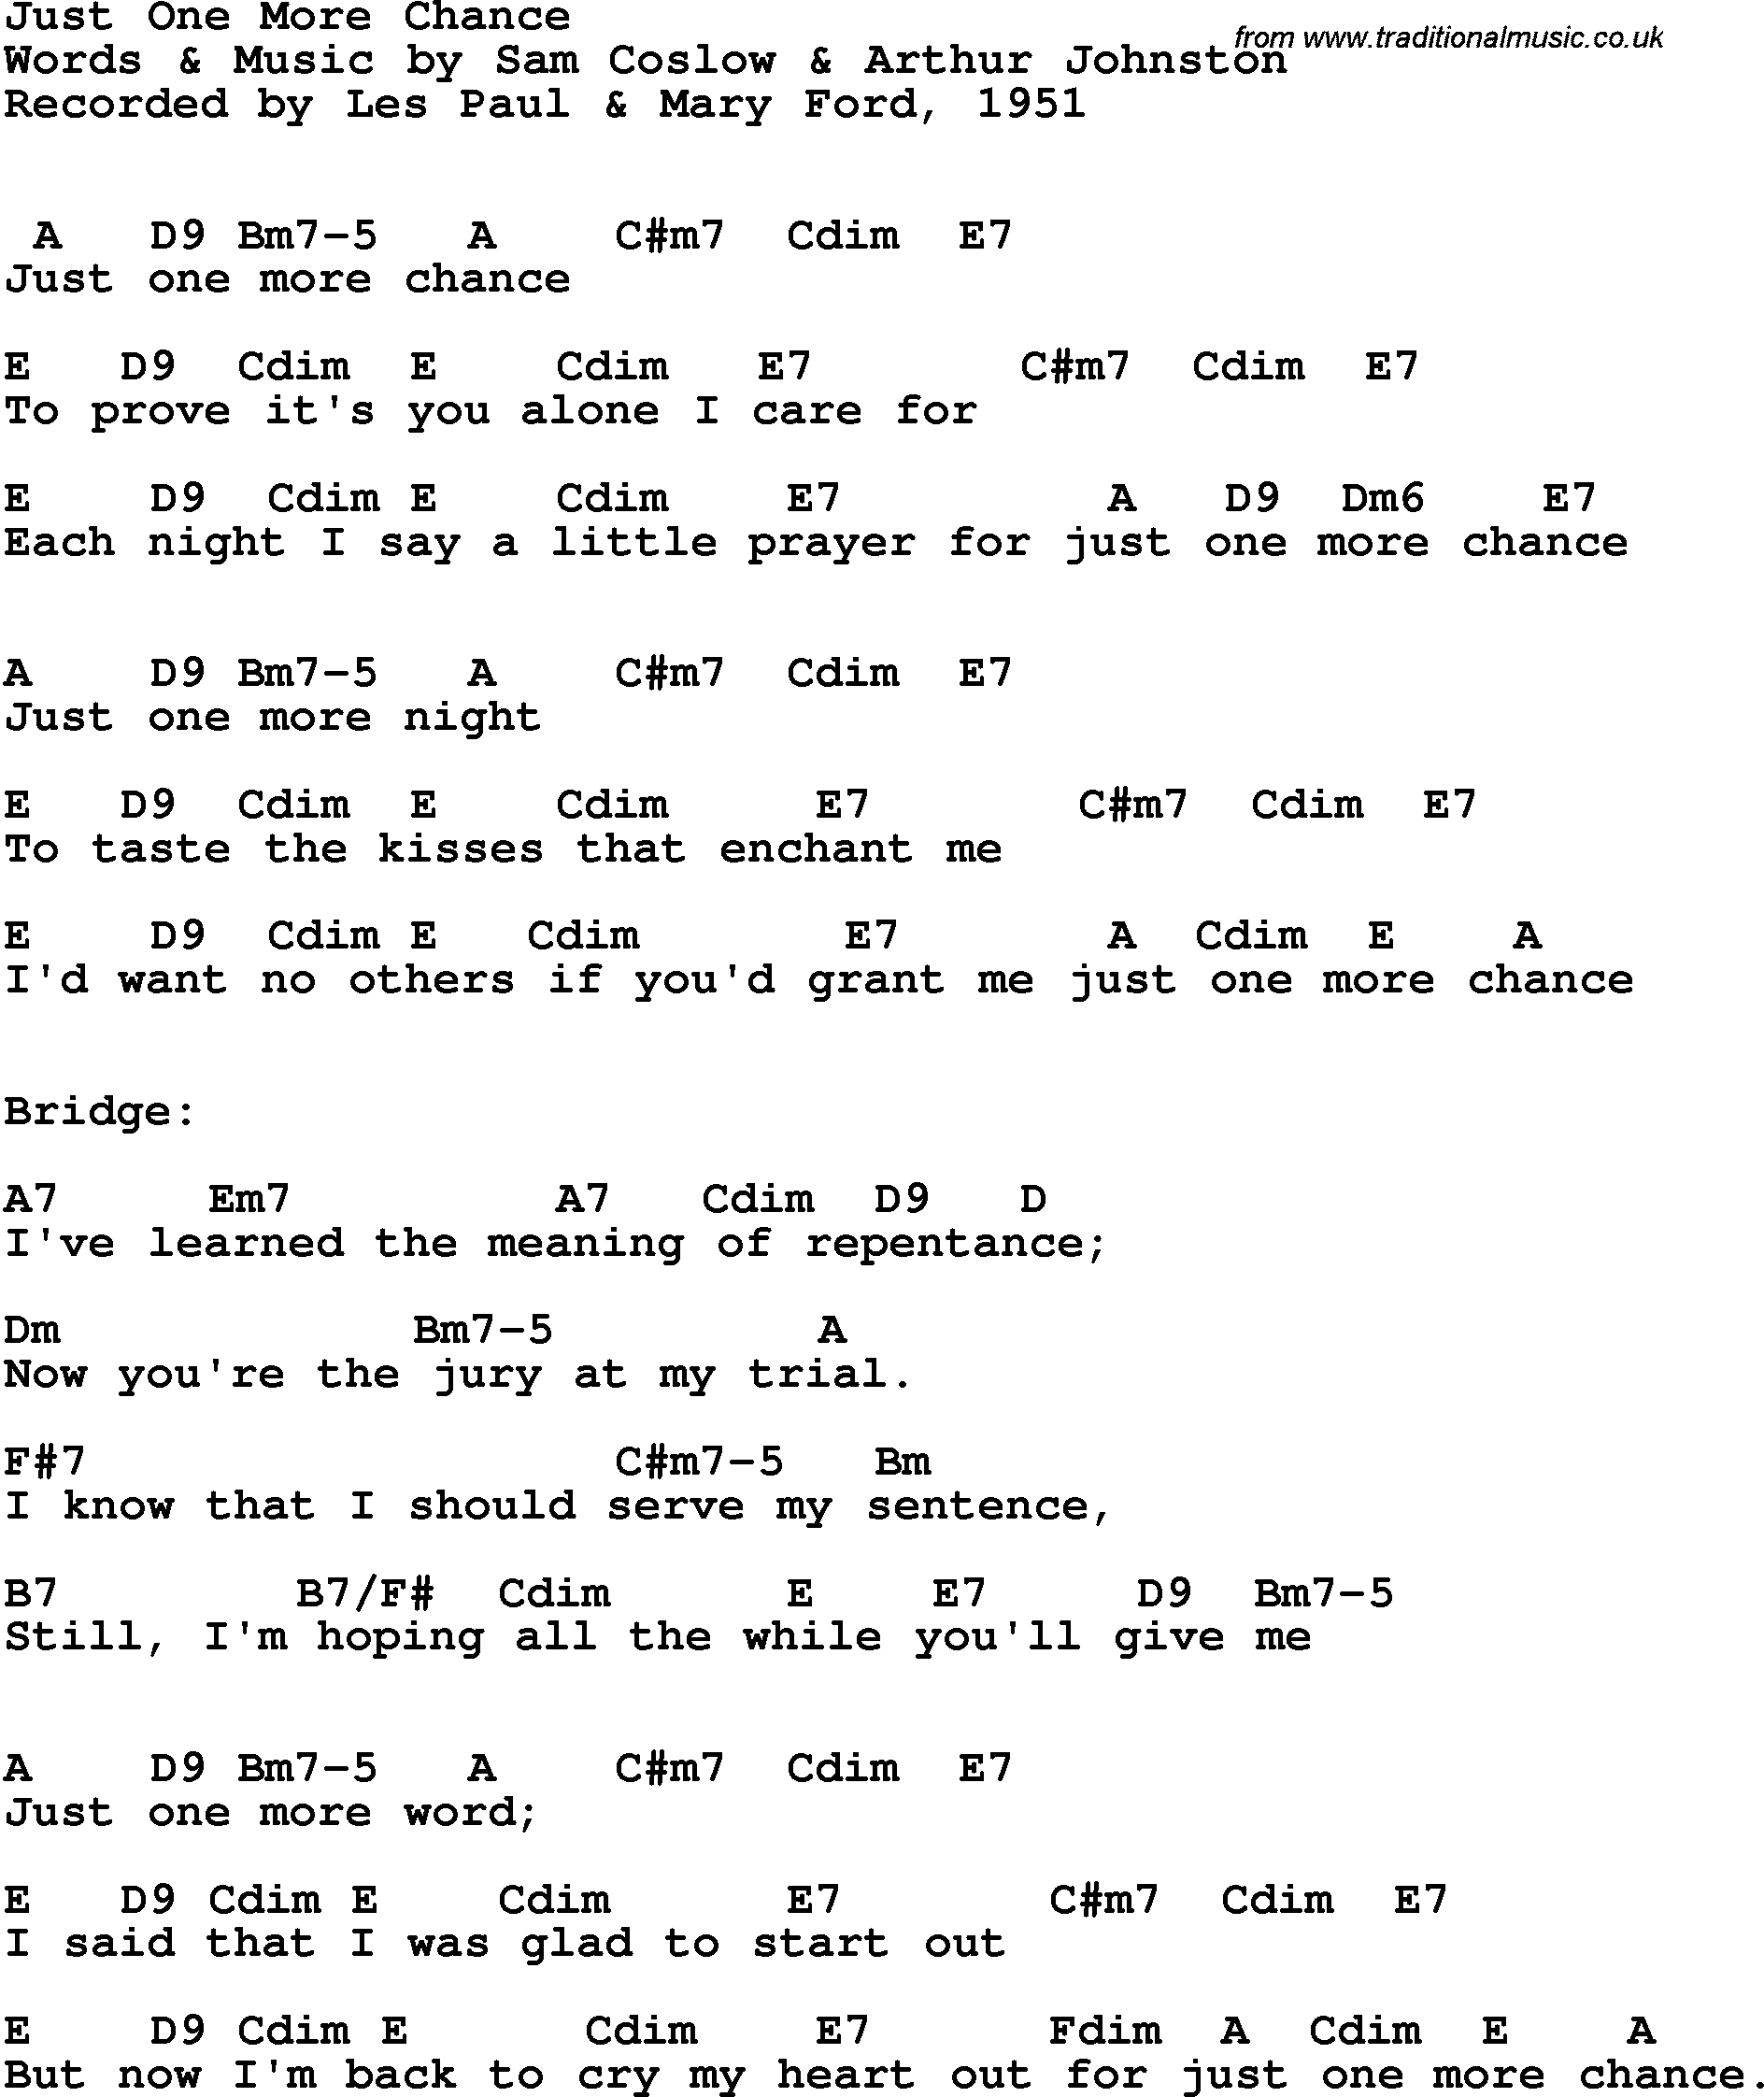 Song Lyrics With Guitar Chords For Just One More Chance Les Paul Mary Ford 1951